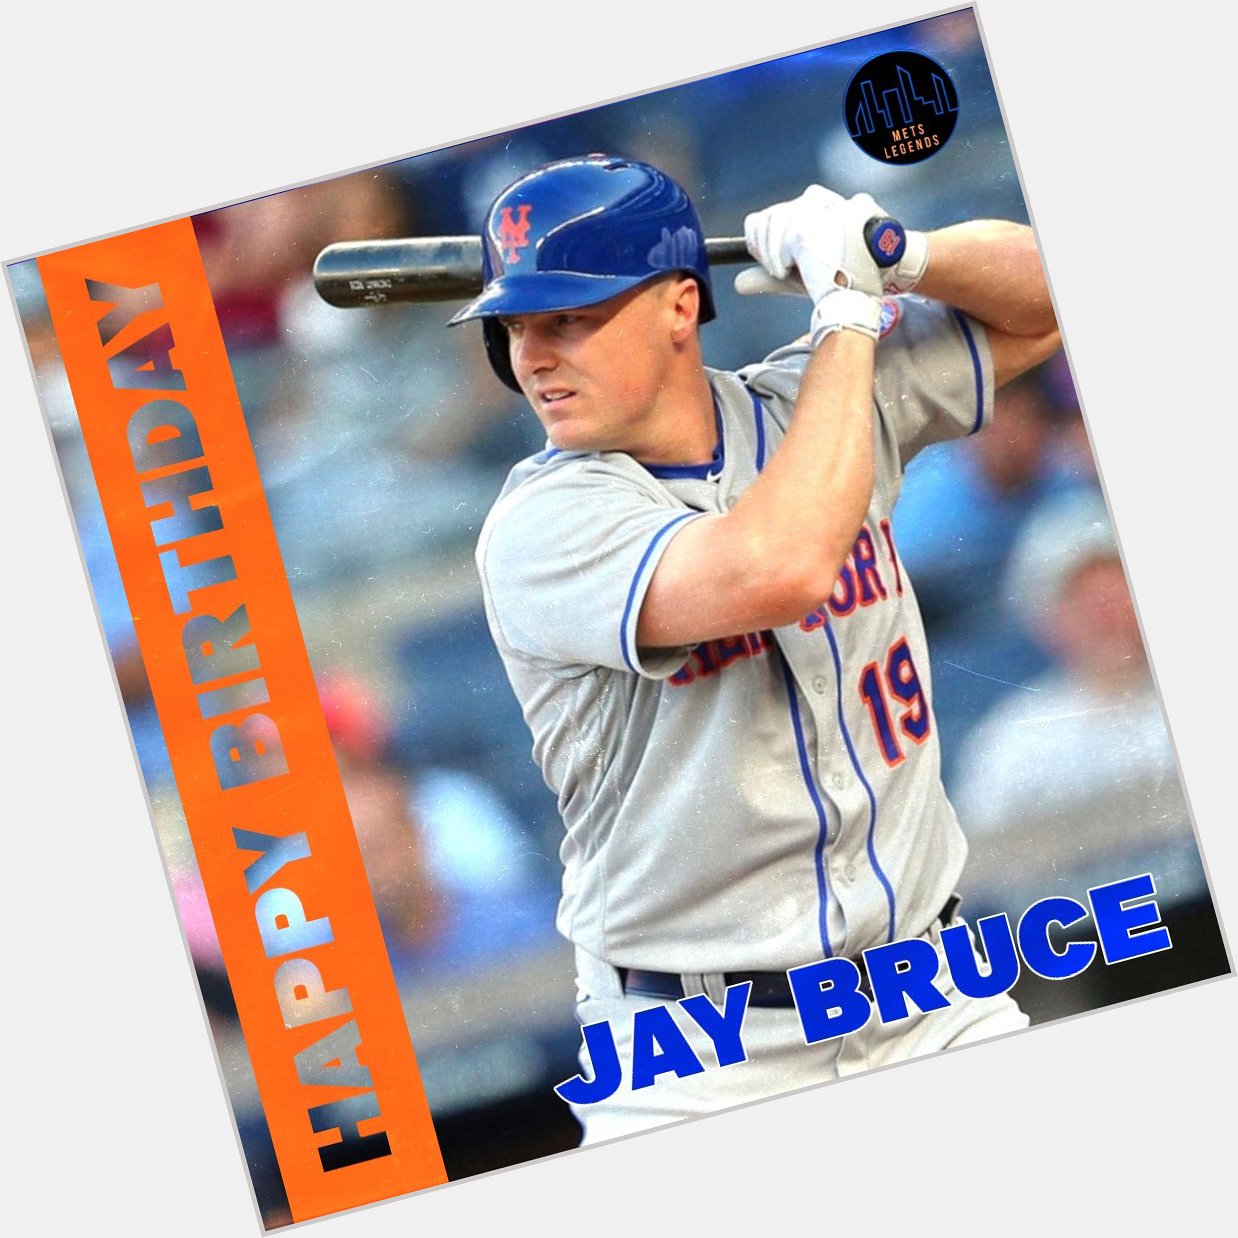 Happy Birthday, Jay Bruce! The former slugger turns 35-years-old today!  